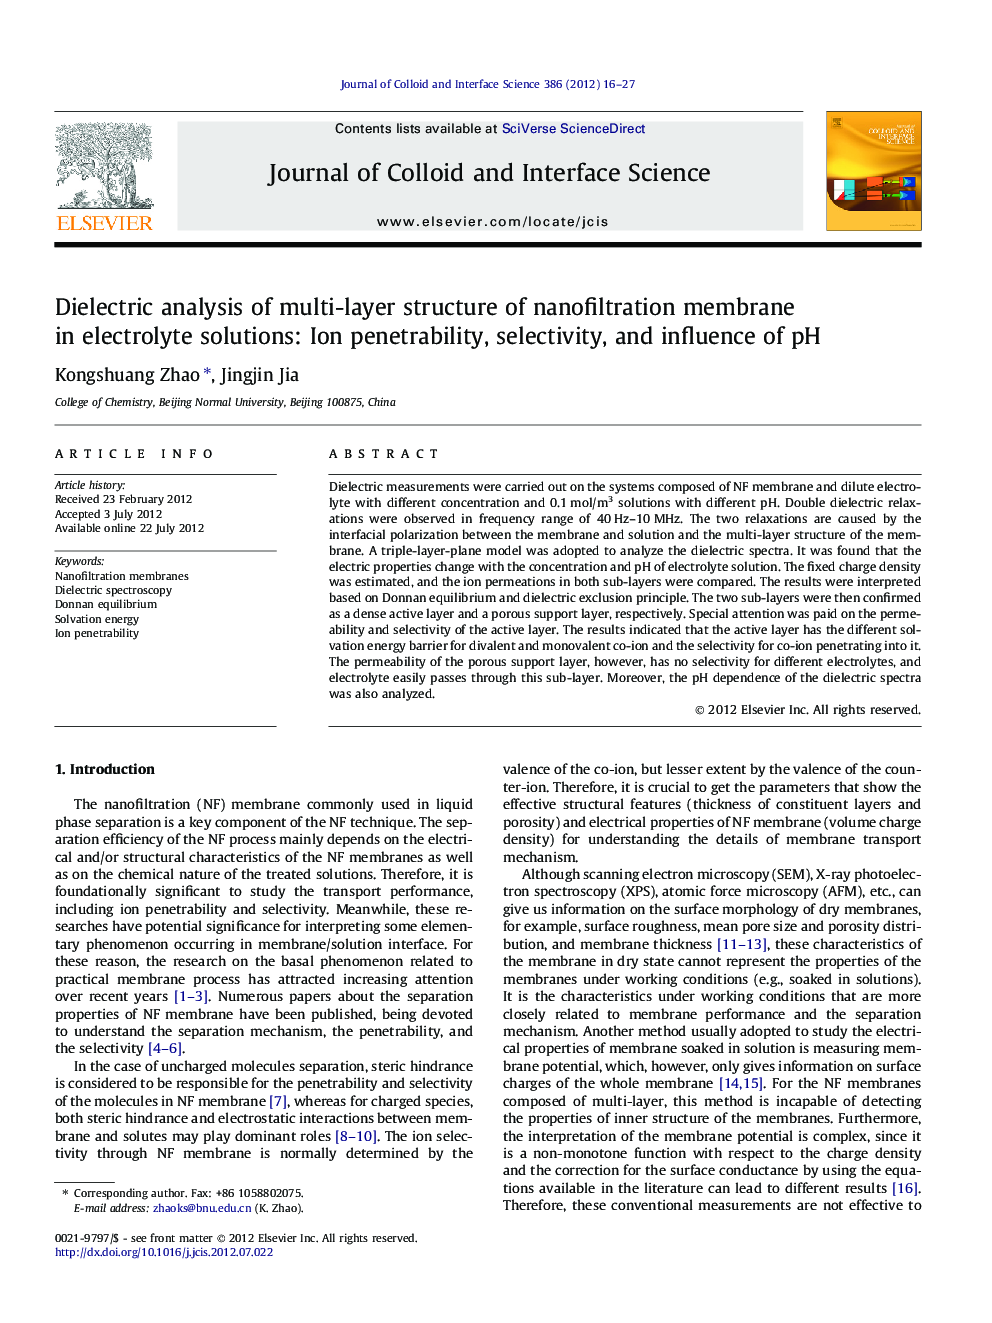 Dielectric analysis of multi-layer structure of nanofiltration membrane in electrolyte solutions: Ion penetrability, selectivity, and influence of pH